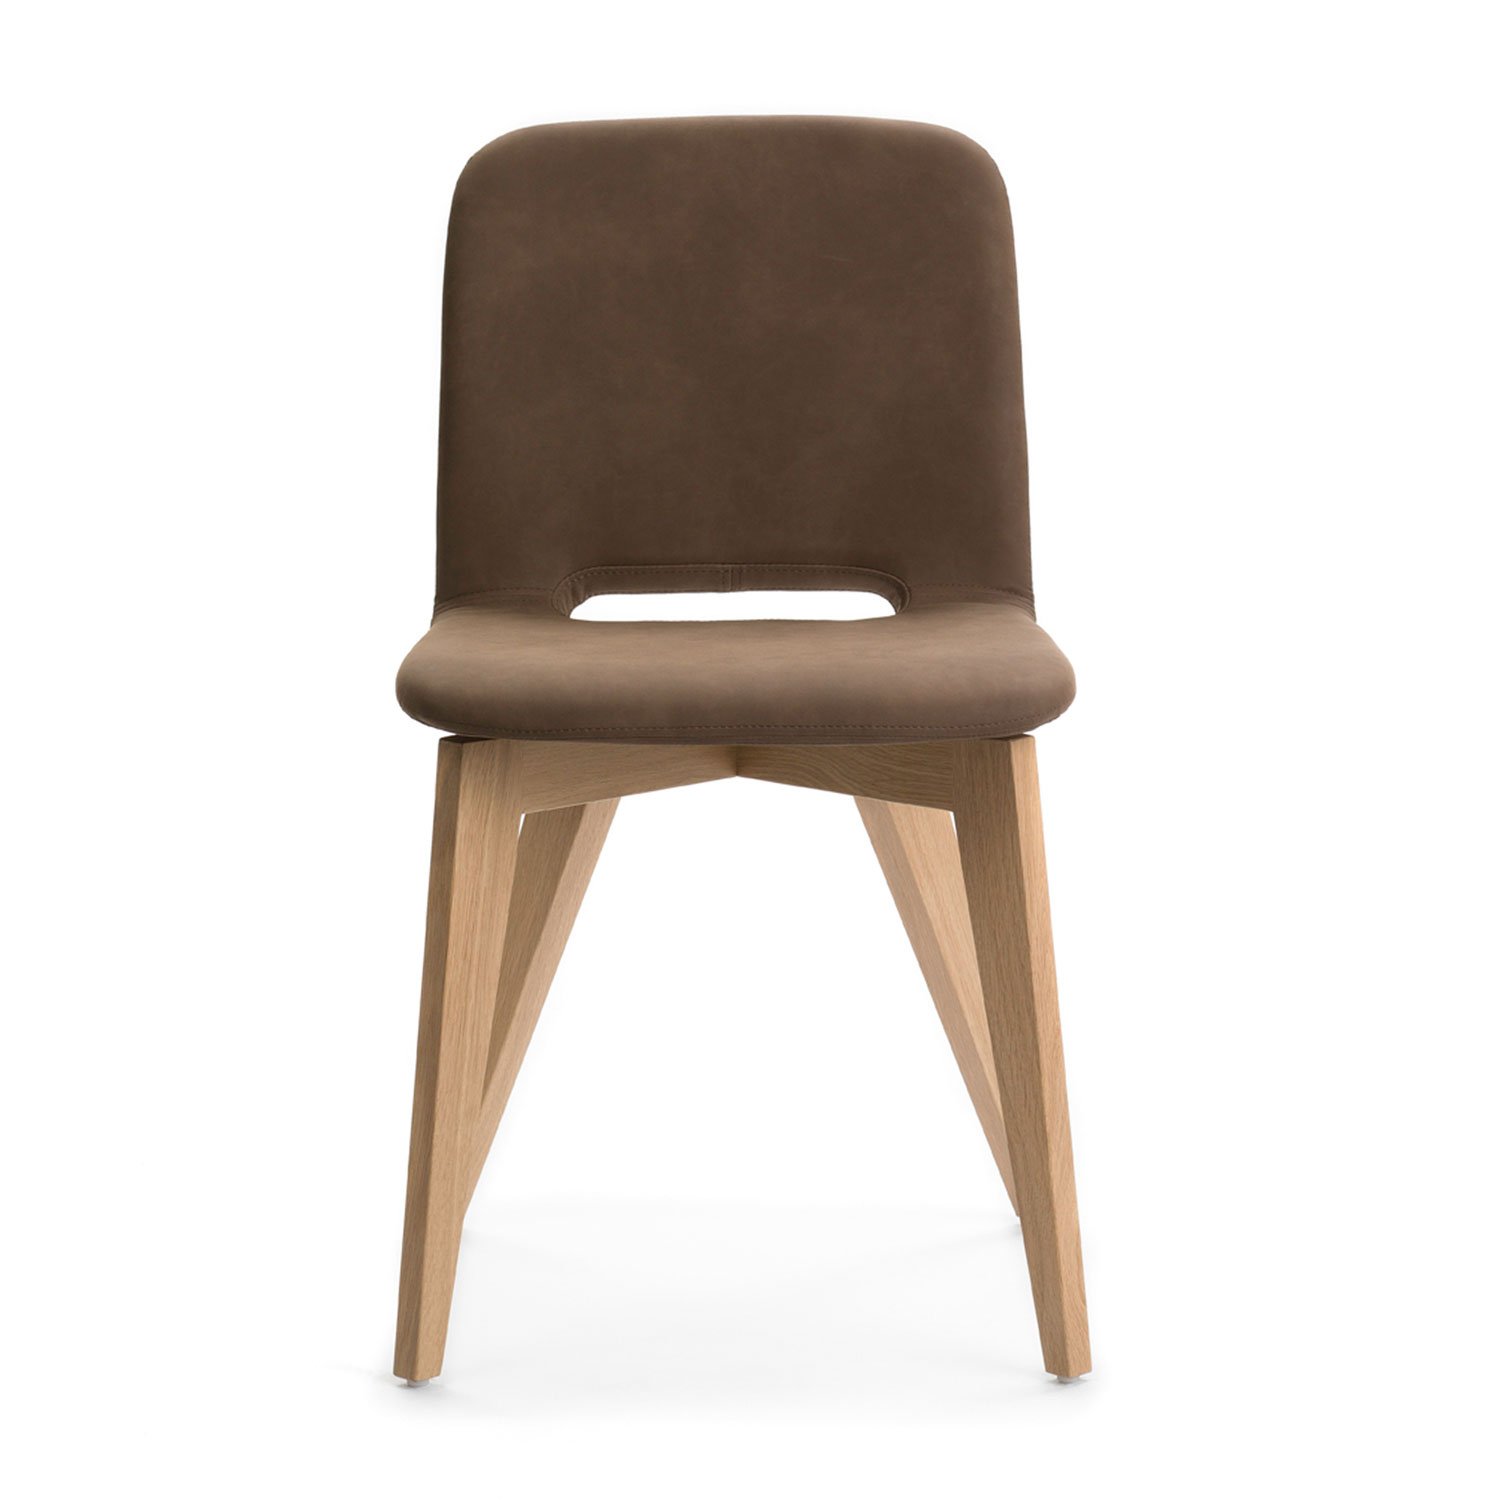 Clapton chairs H47 - wooden legs